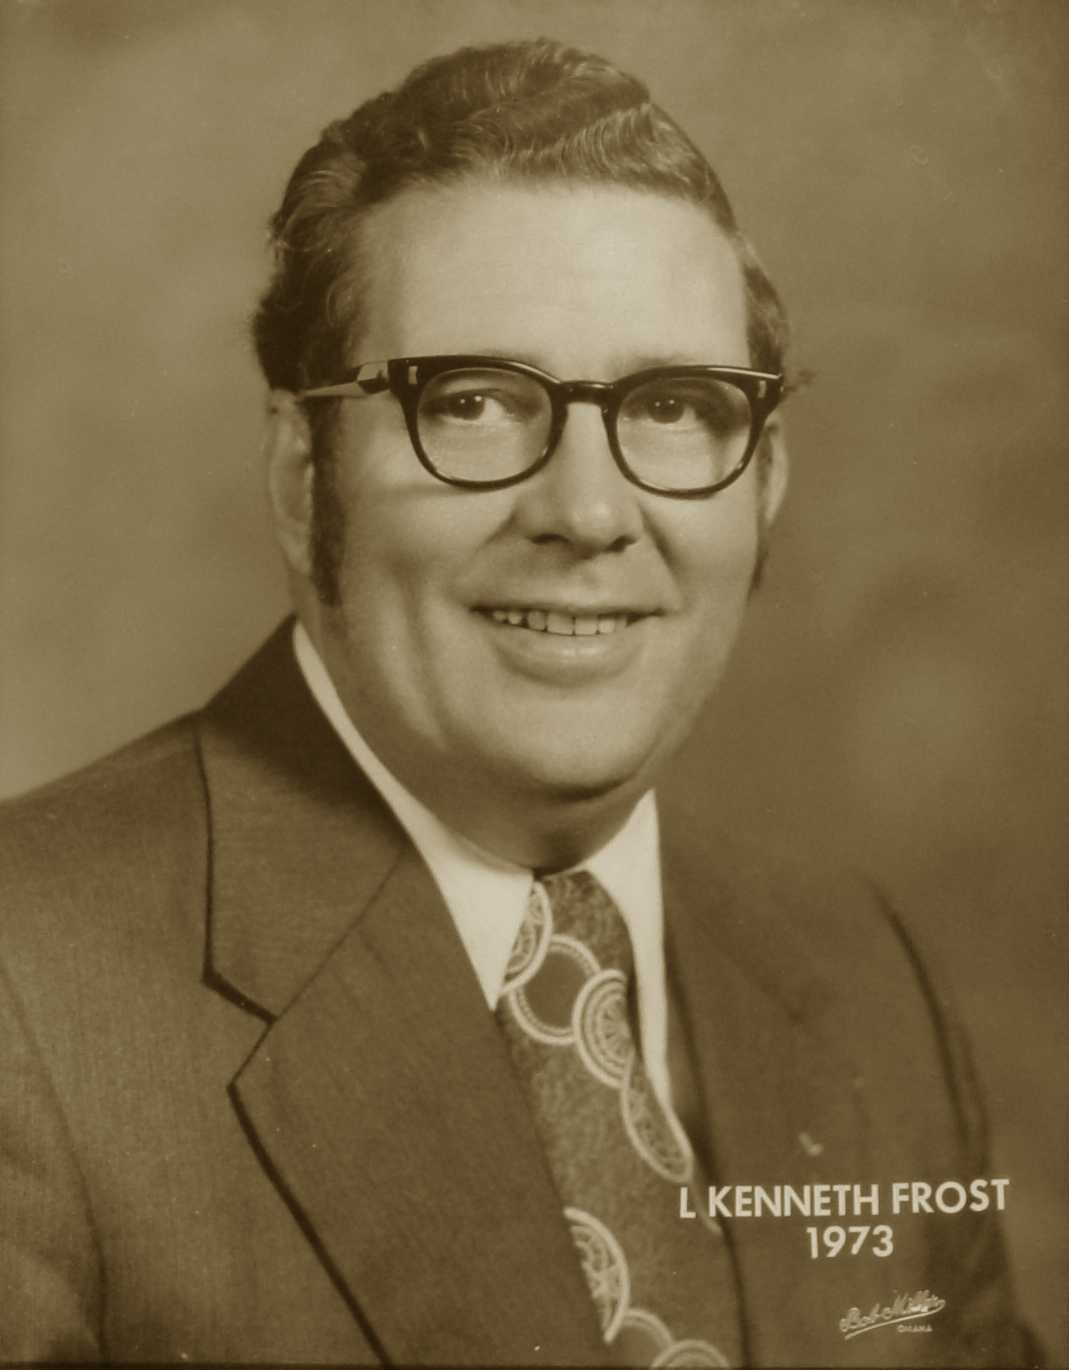 L. Kenneth Frost, 1973